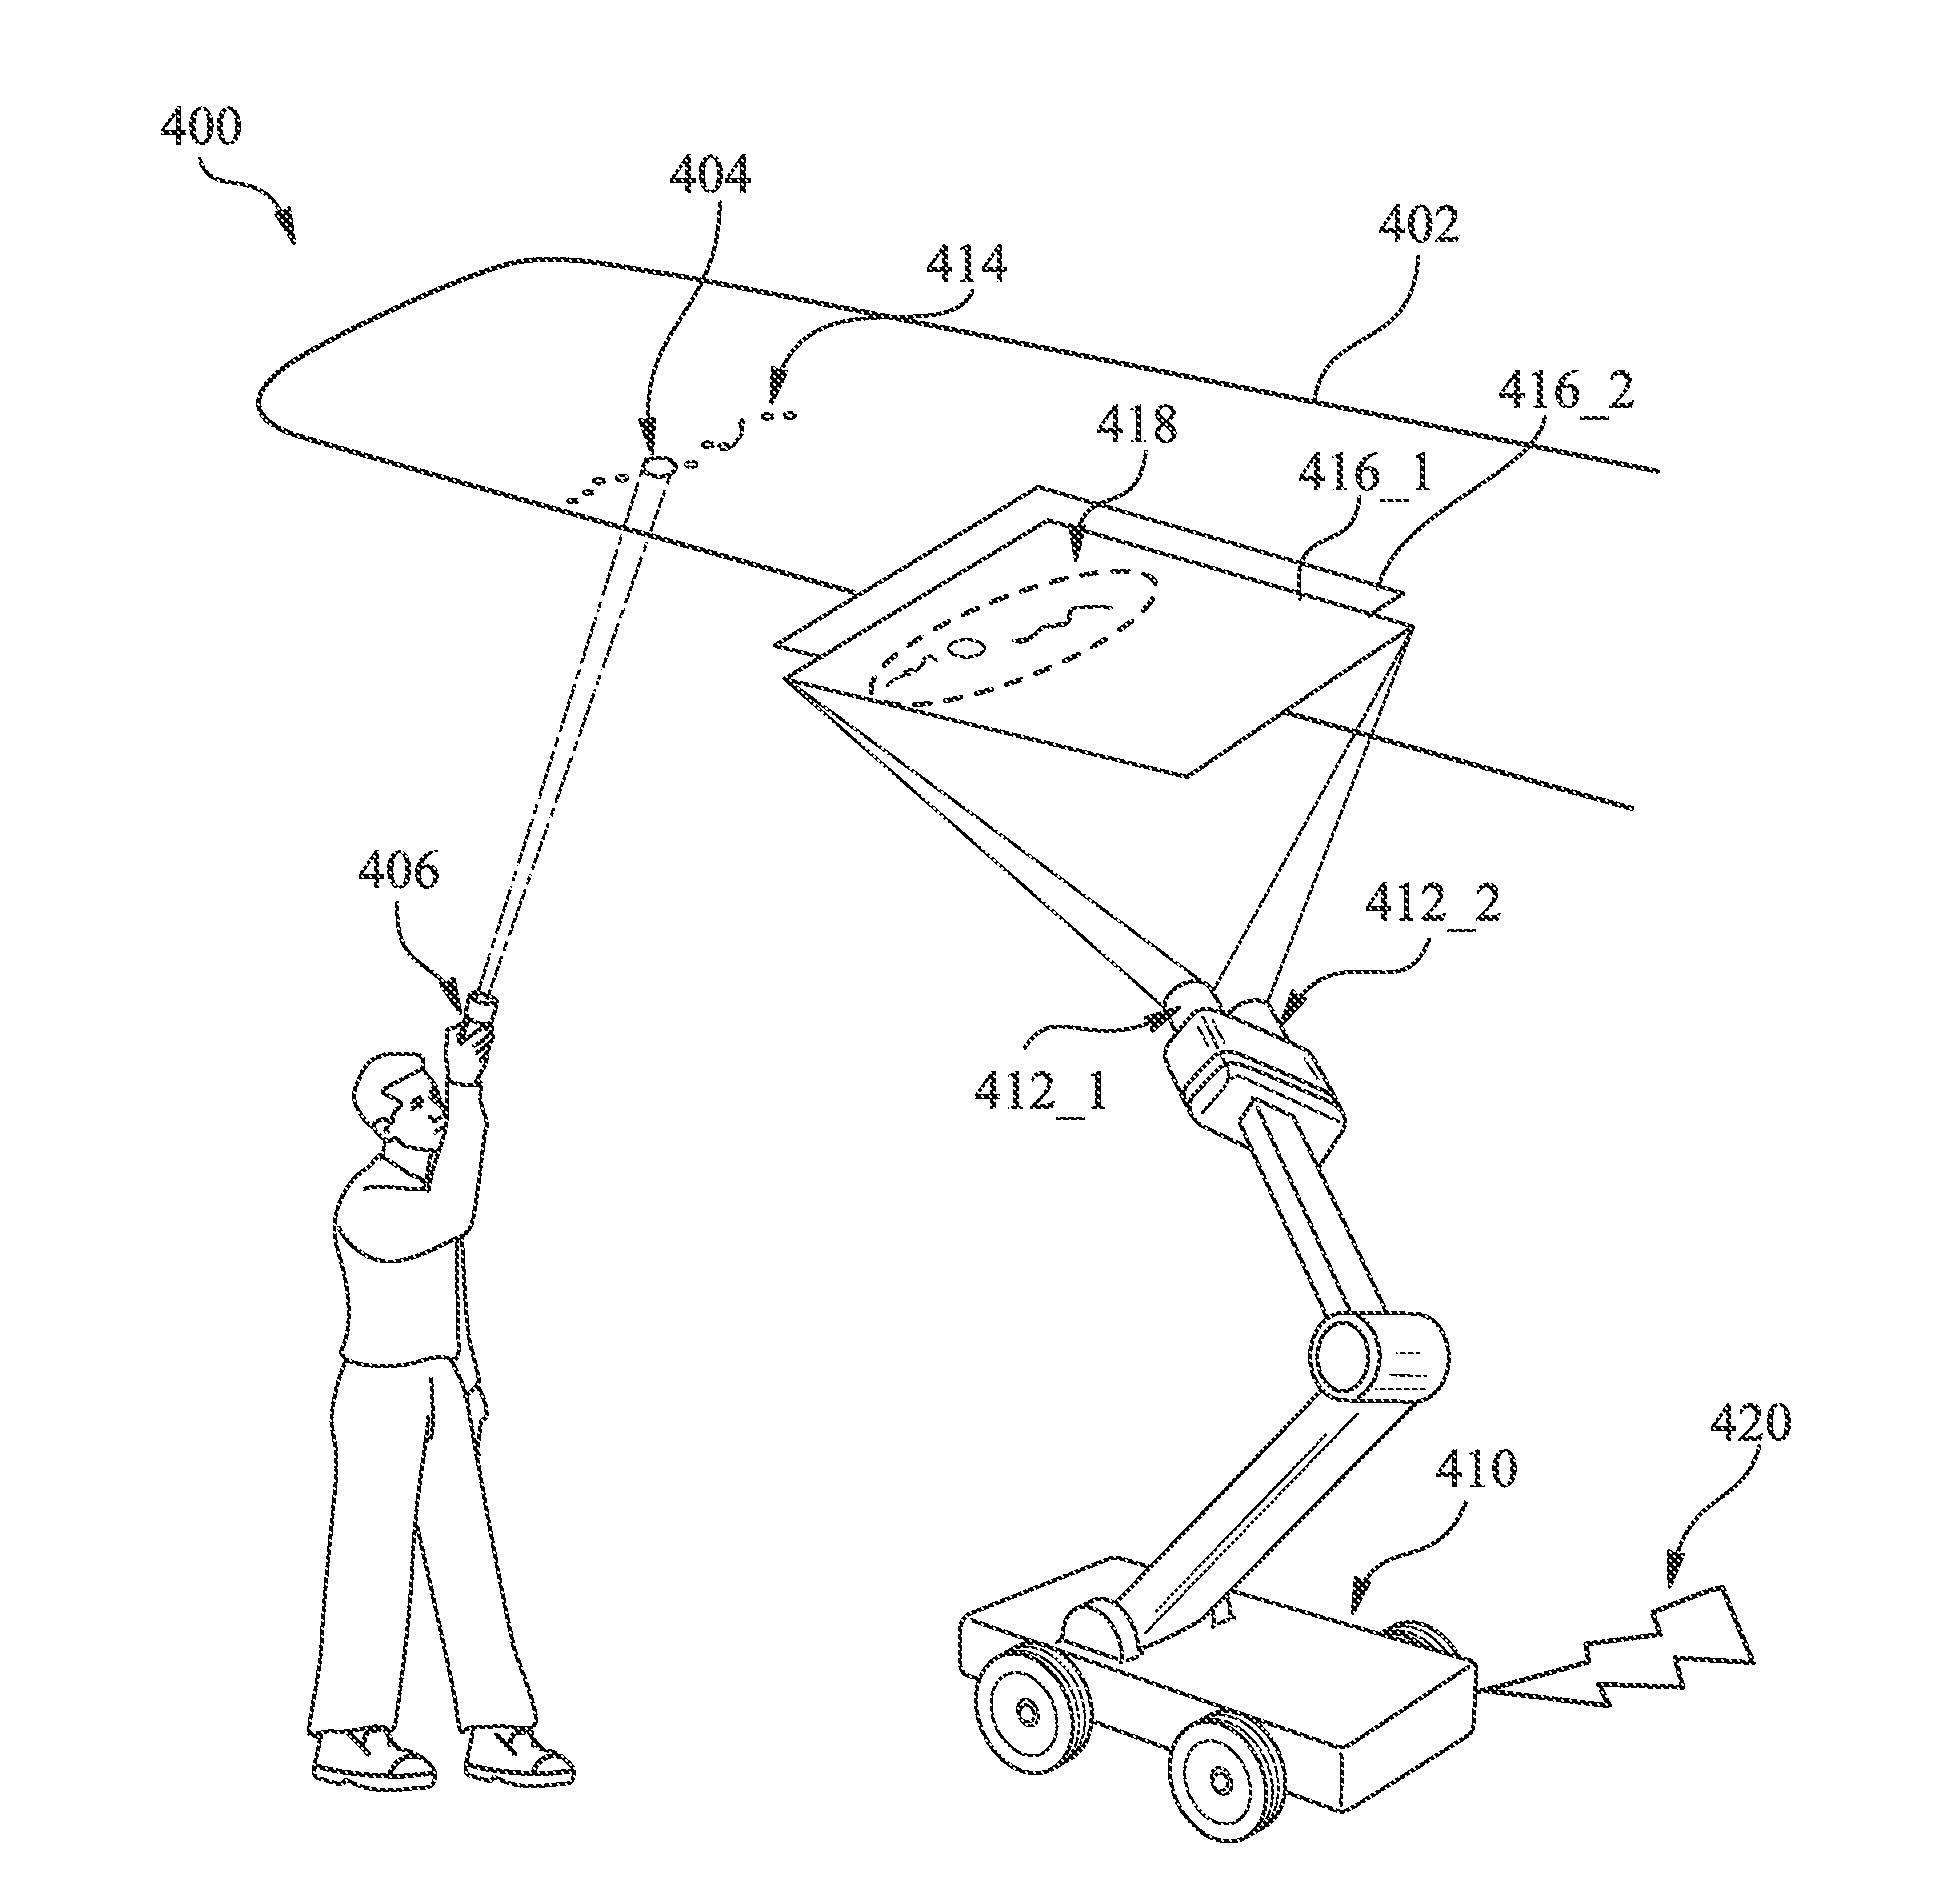 Apparatus and methods for controlling attention of a robot